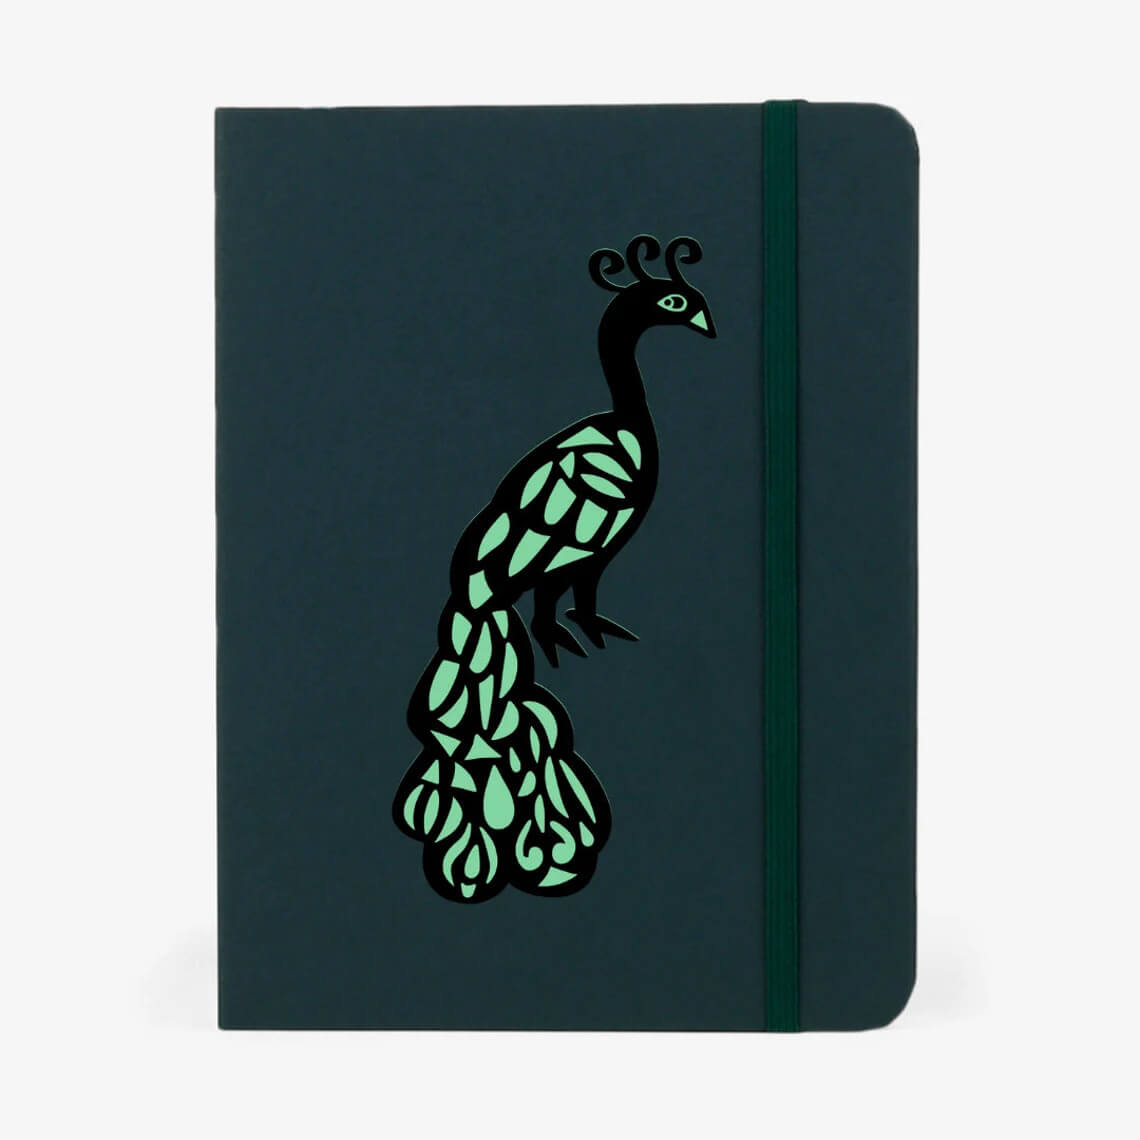 Black notebook with a green peacock on it.